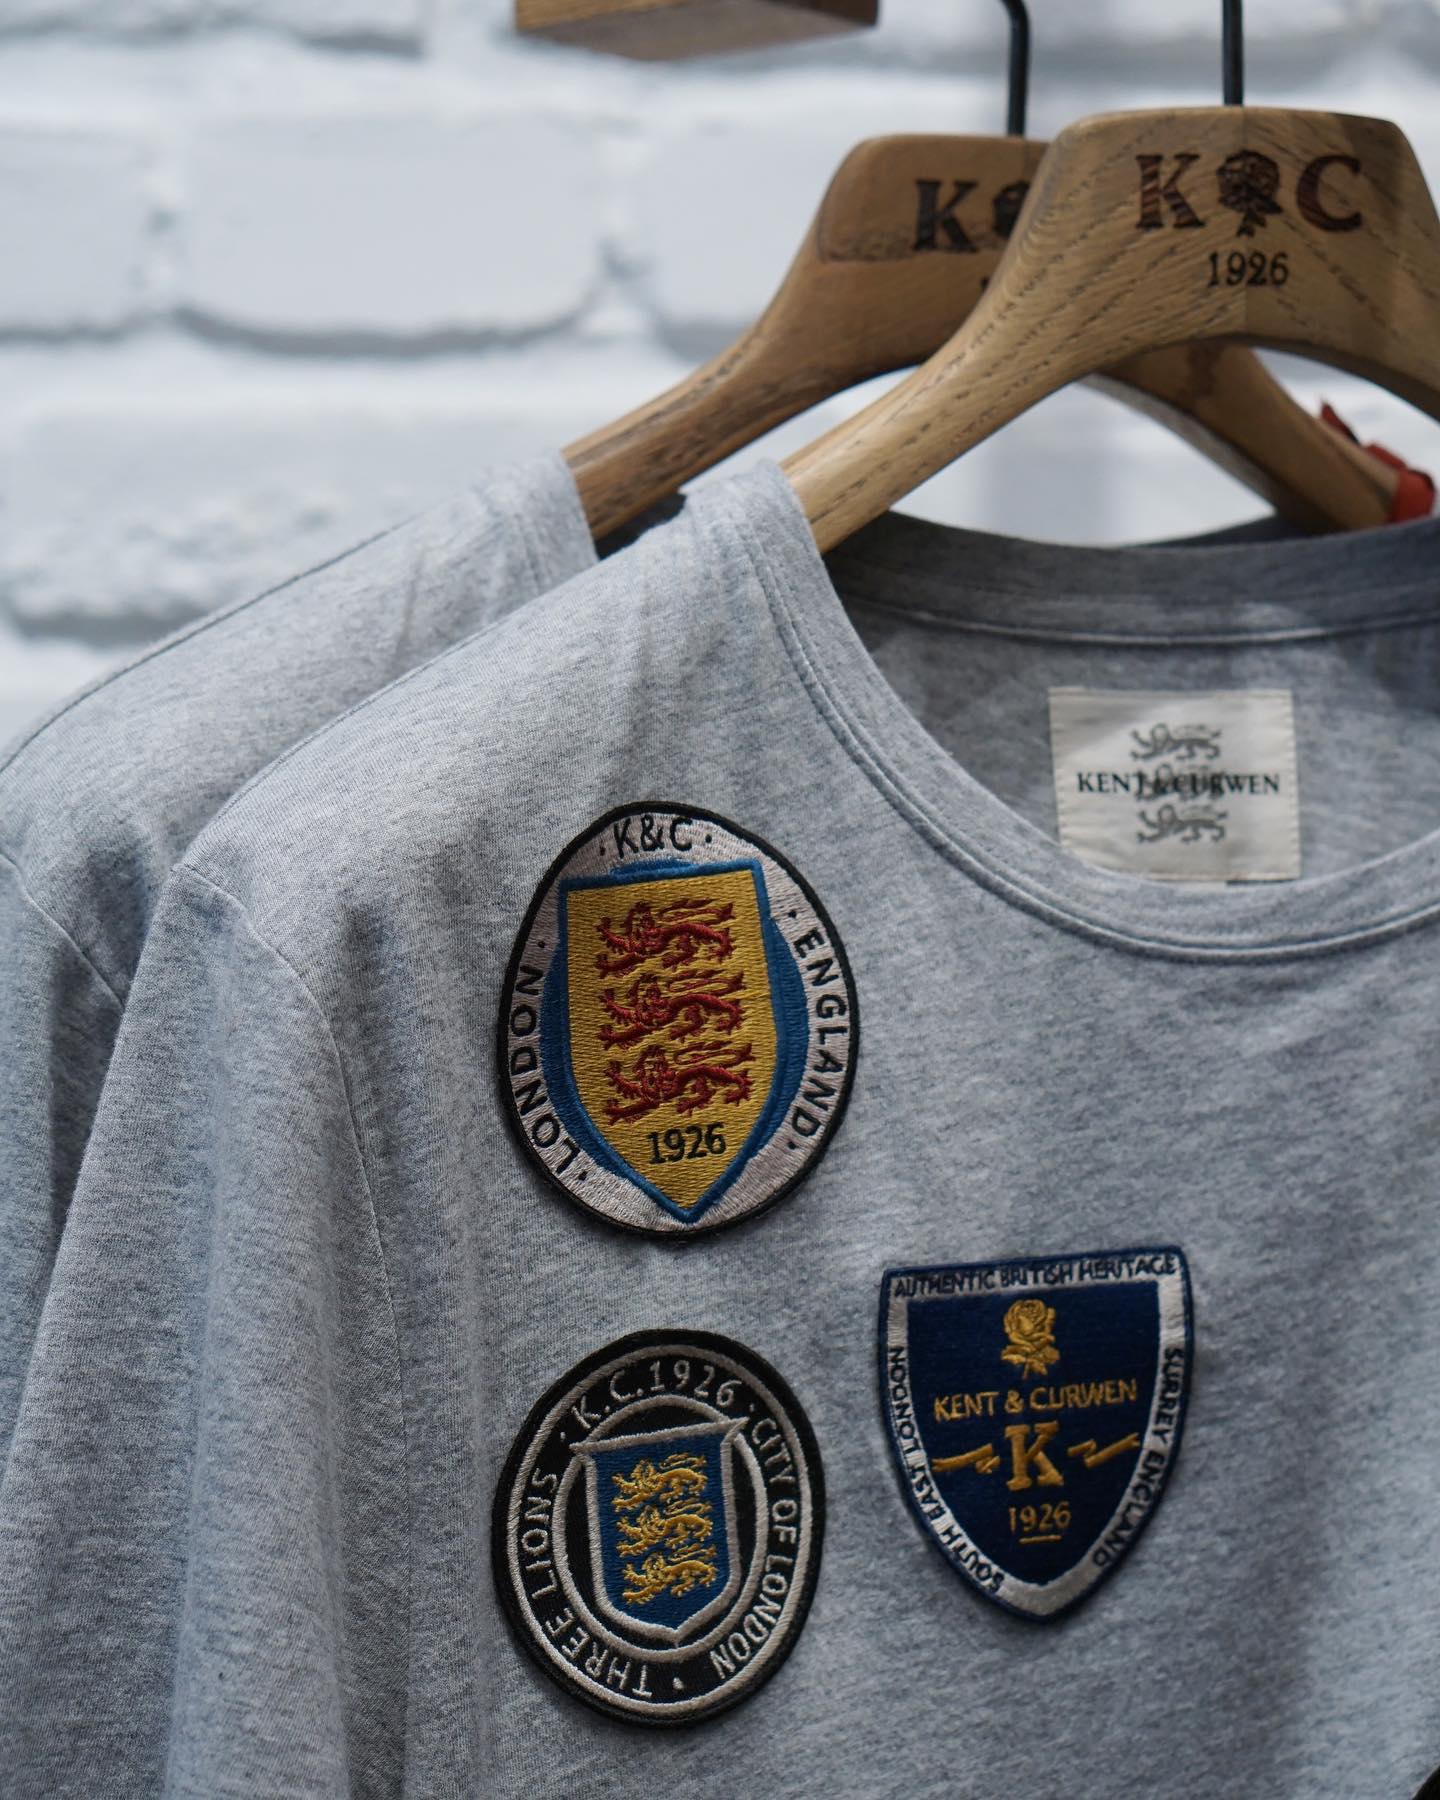 Authentic badges from our sporting and military archive, reworked on seasonal basics.